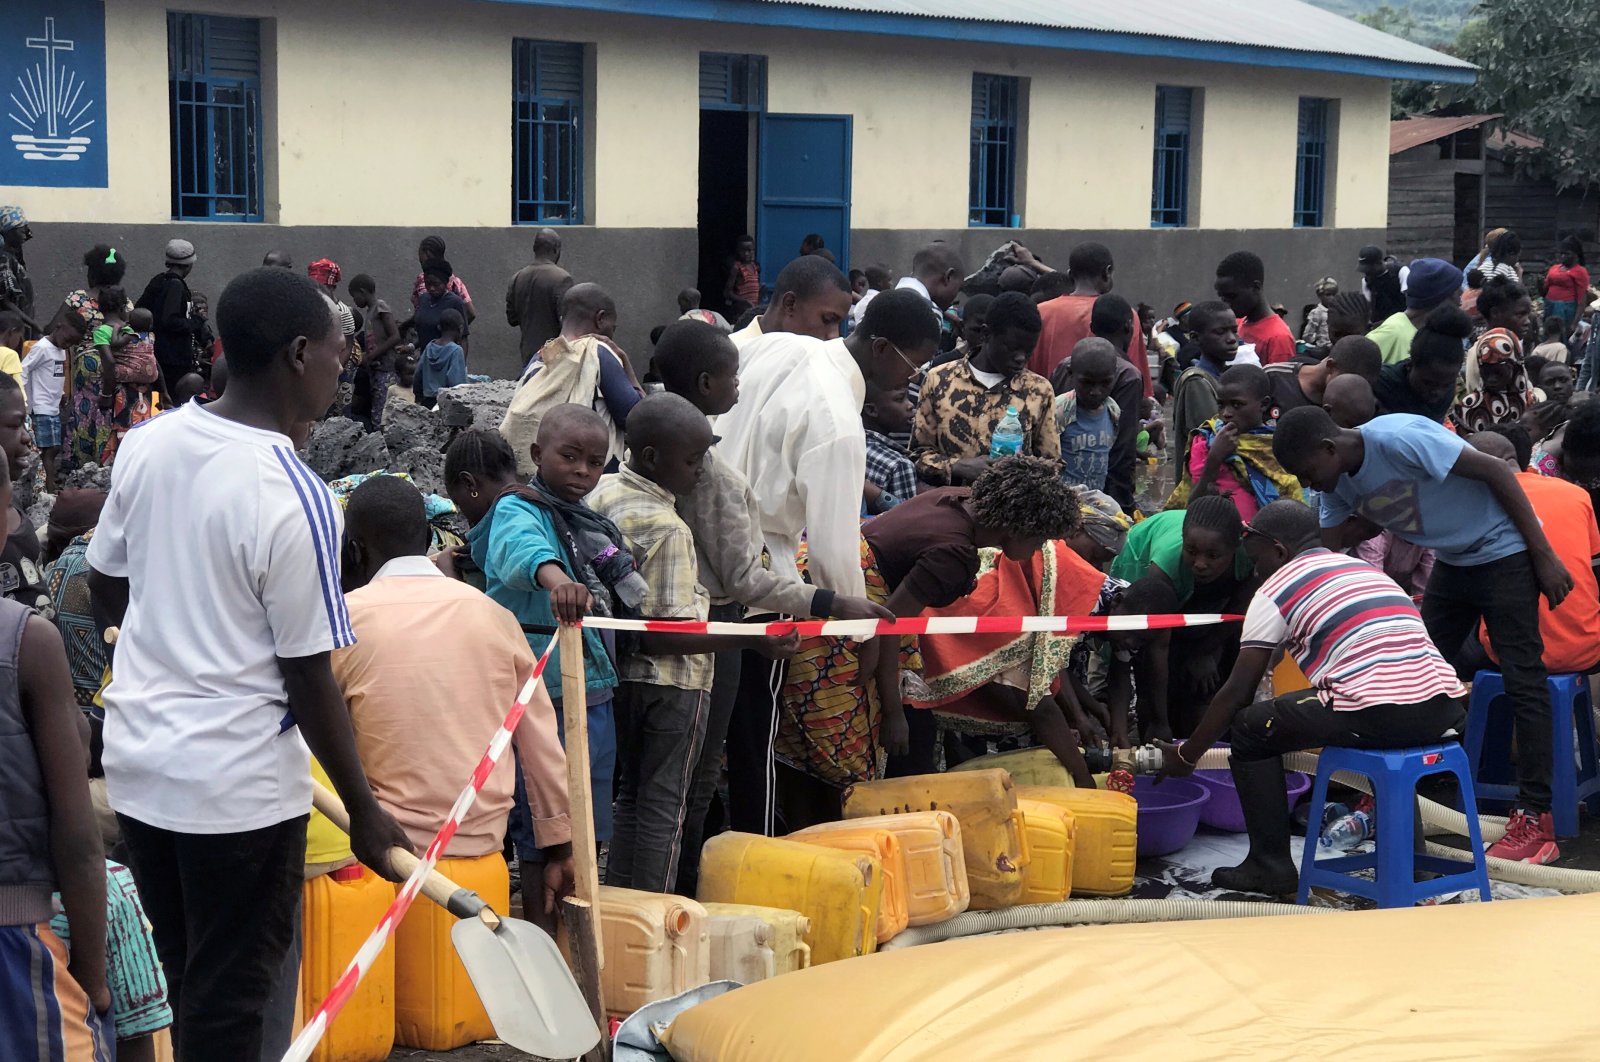 Congolese are waiting for help and protection after fleeing